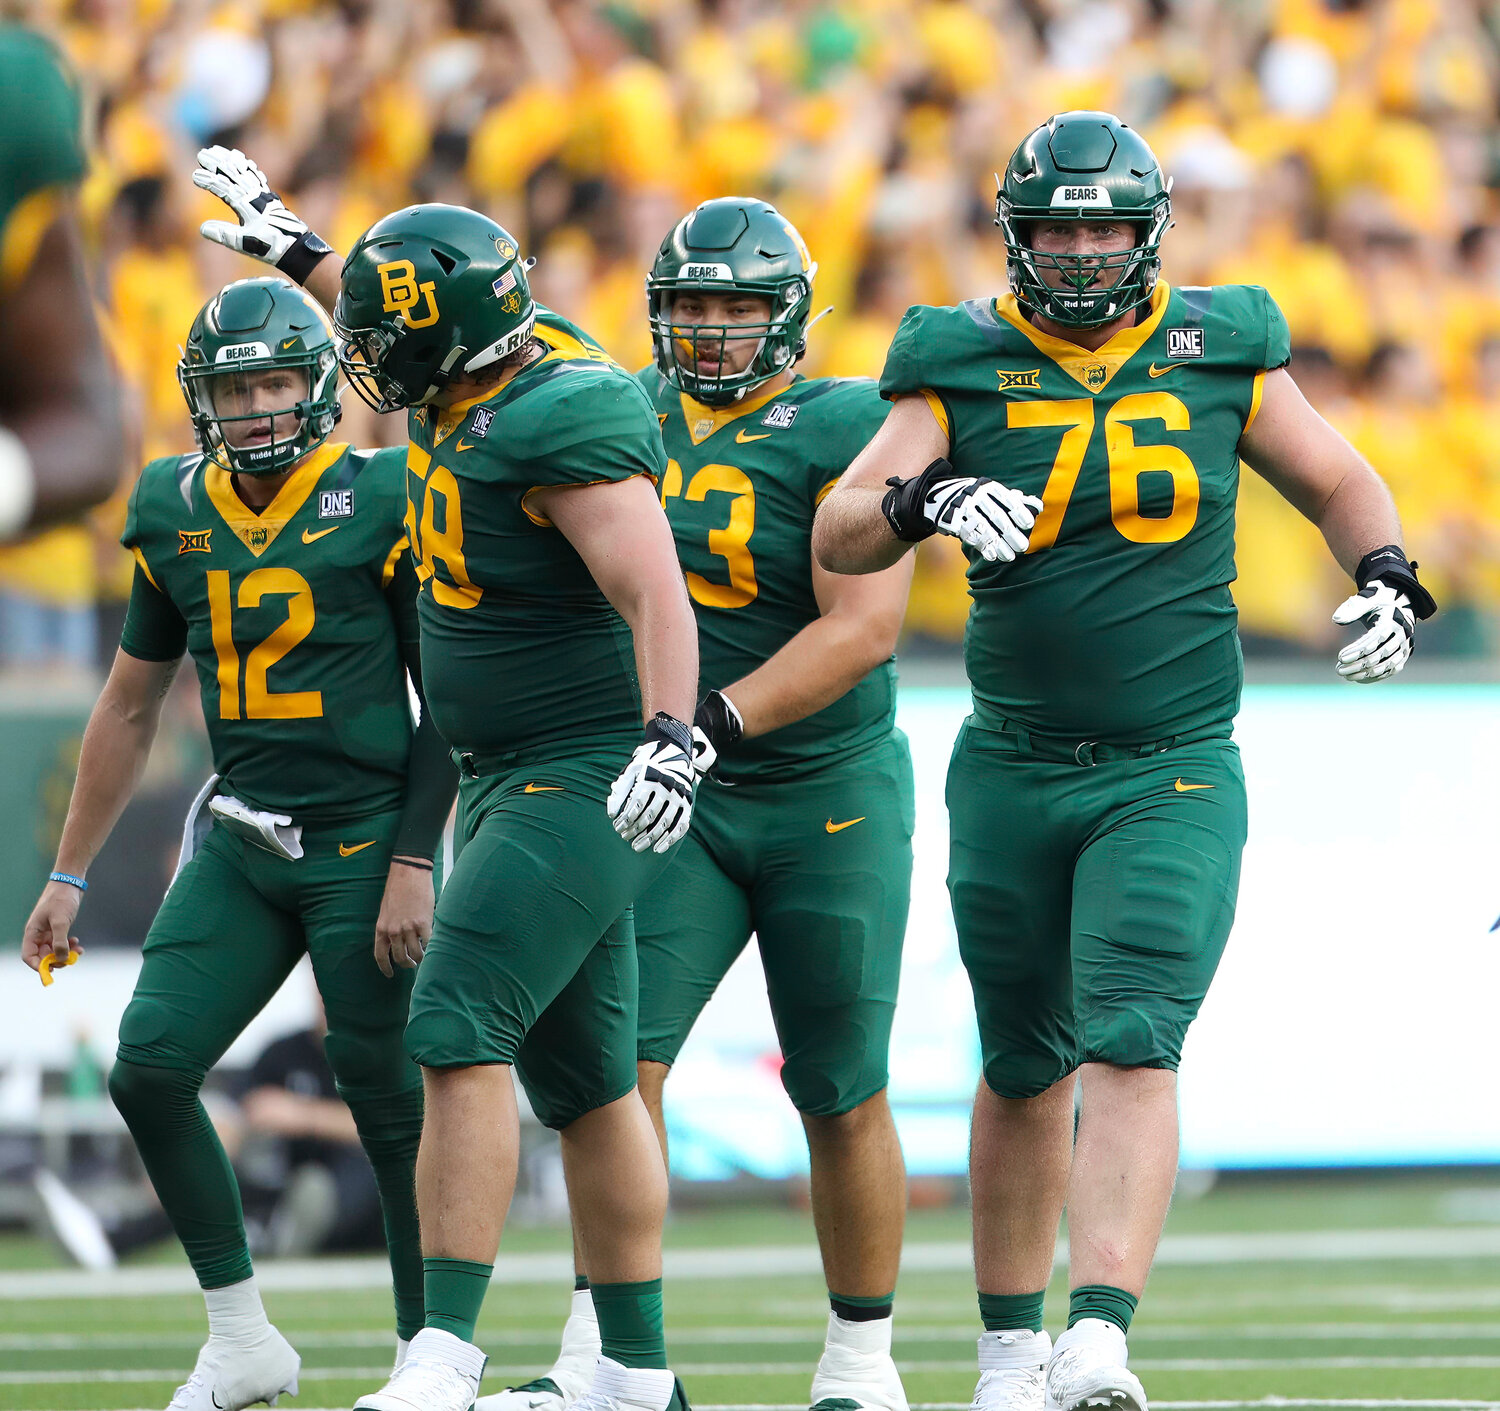 Baylor offensive lineman Connor Galvin (76) during a college football game between Baylor and Albany in Waco, Texas, on Sept. 3, 2022.